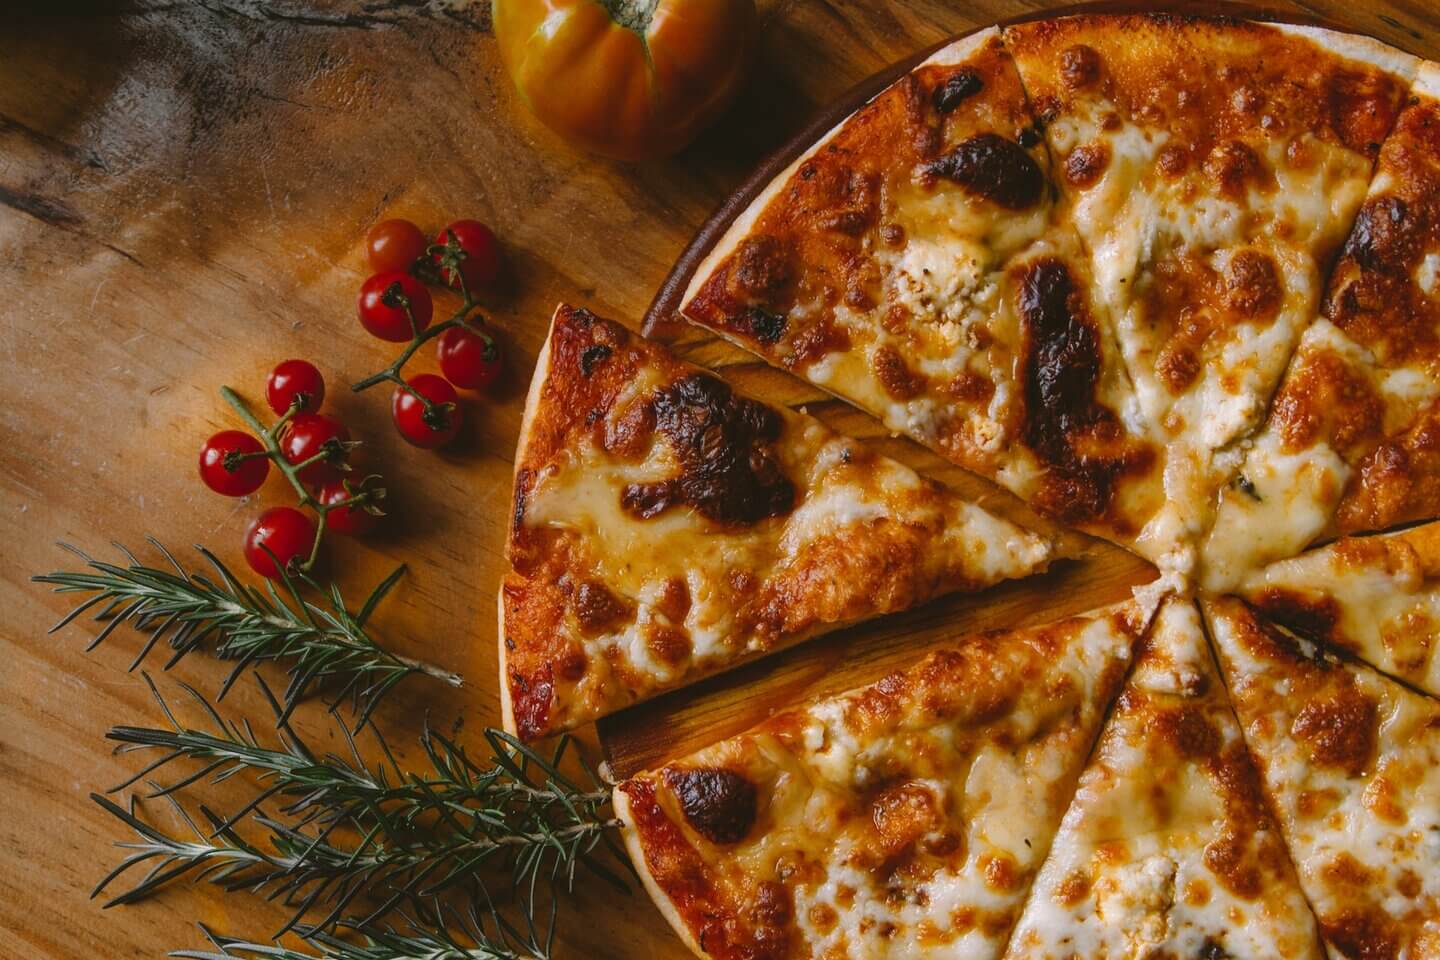 Photo of a pizza on a wooden surface